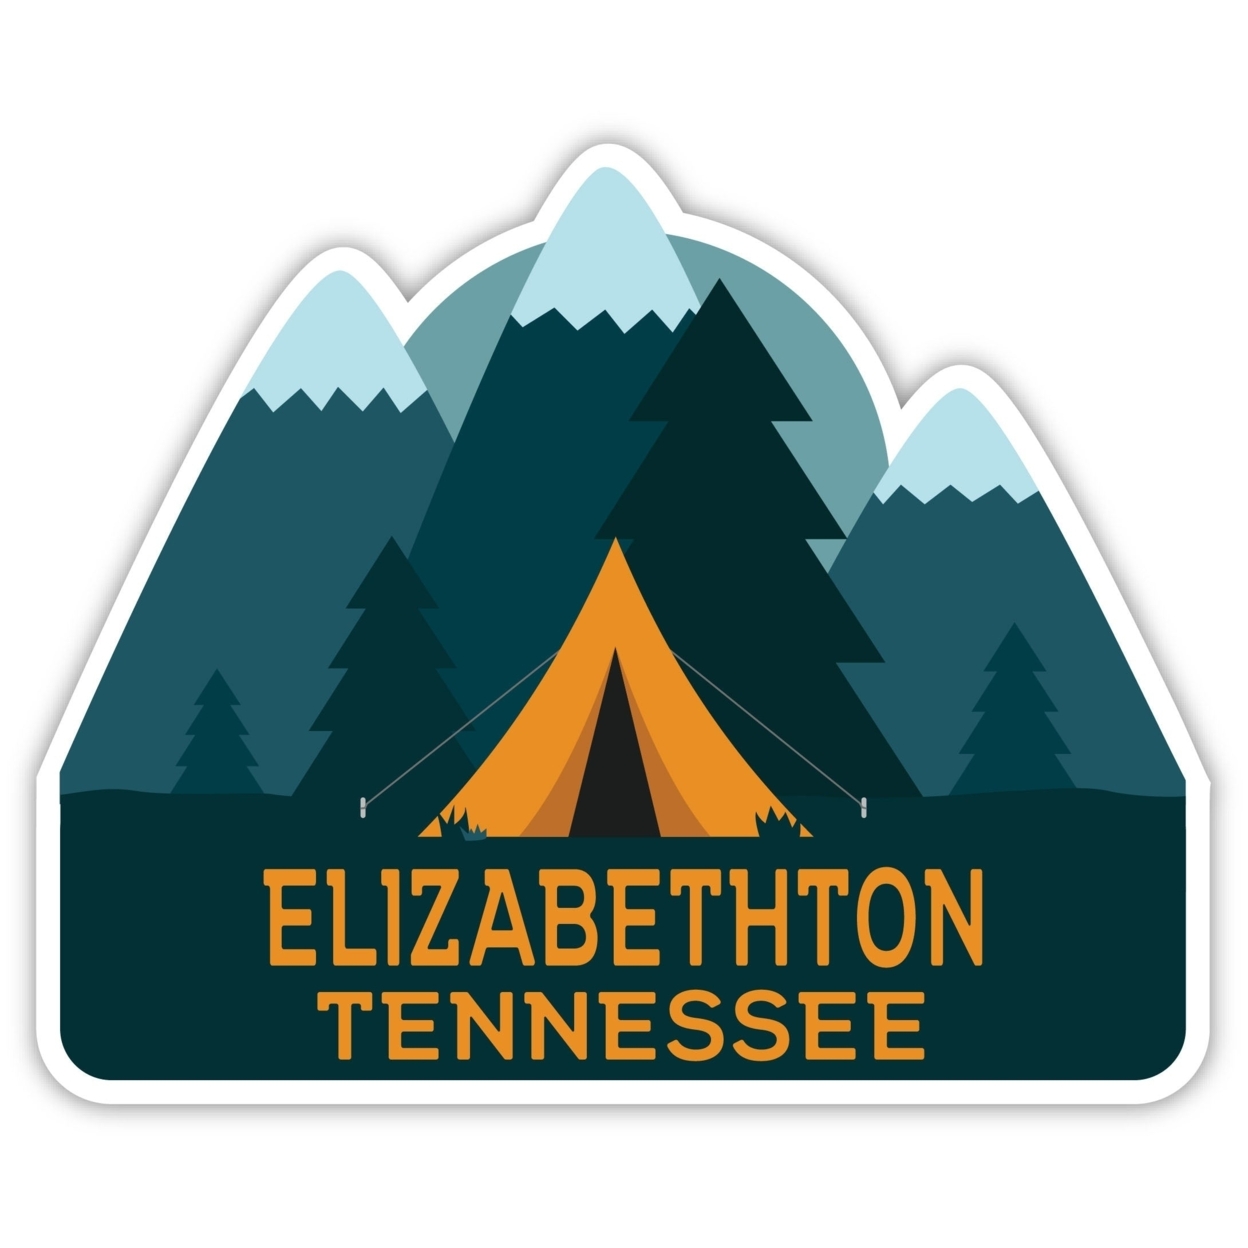 Elizabethton Tennessee Souvenir Decorative Stickers (Choose Theme And Size) - 4-Pack, 4-Inch, Tent